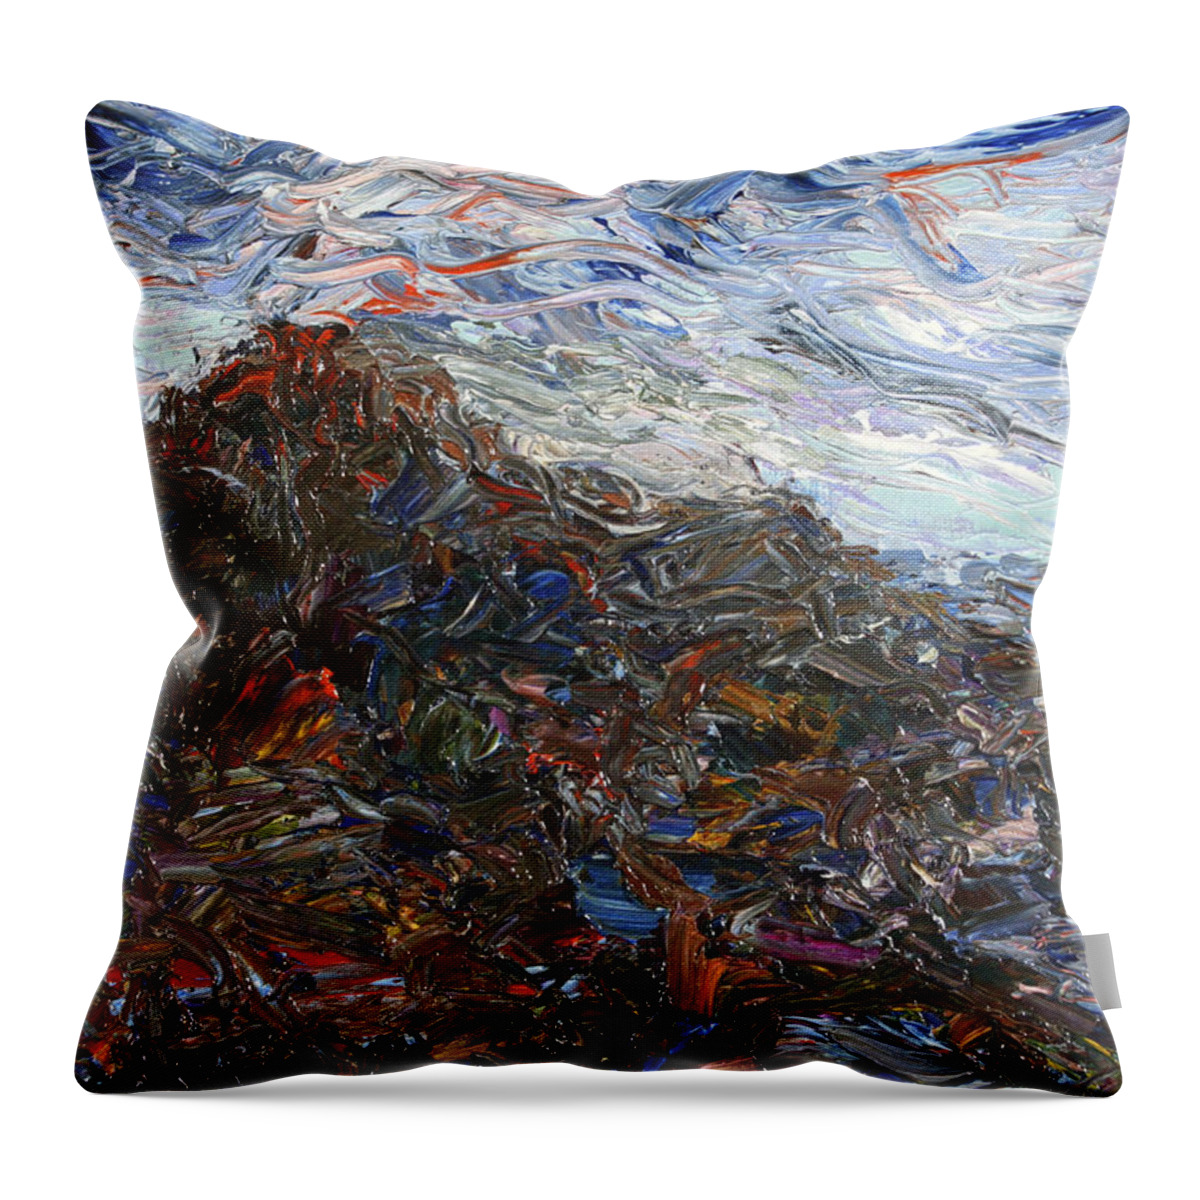 Volcano Throw Pillow featuring the painting Volcano by James W Johnson